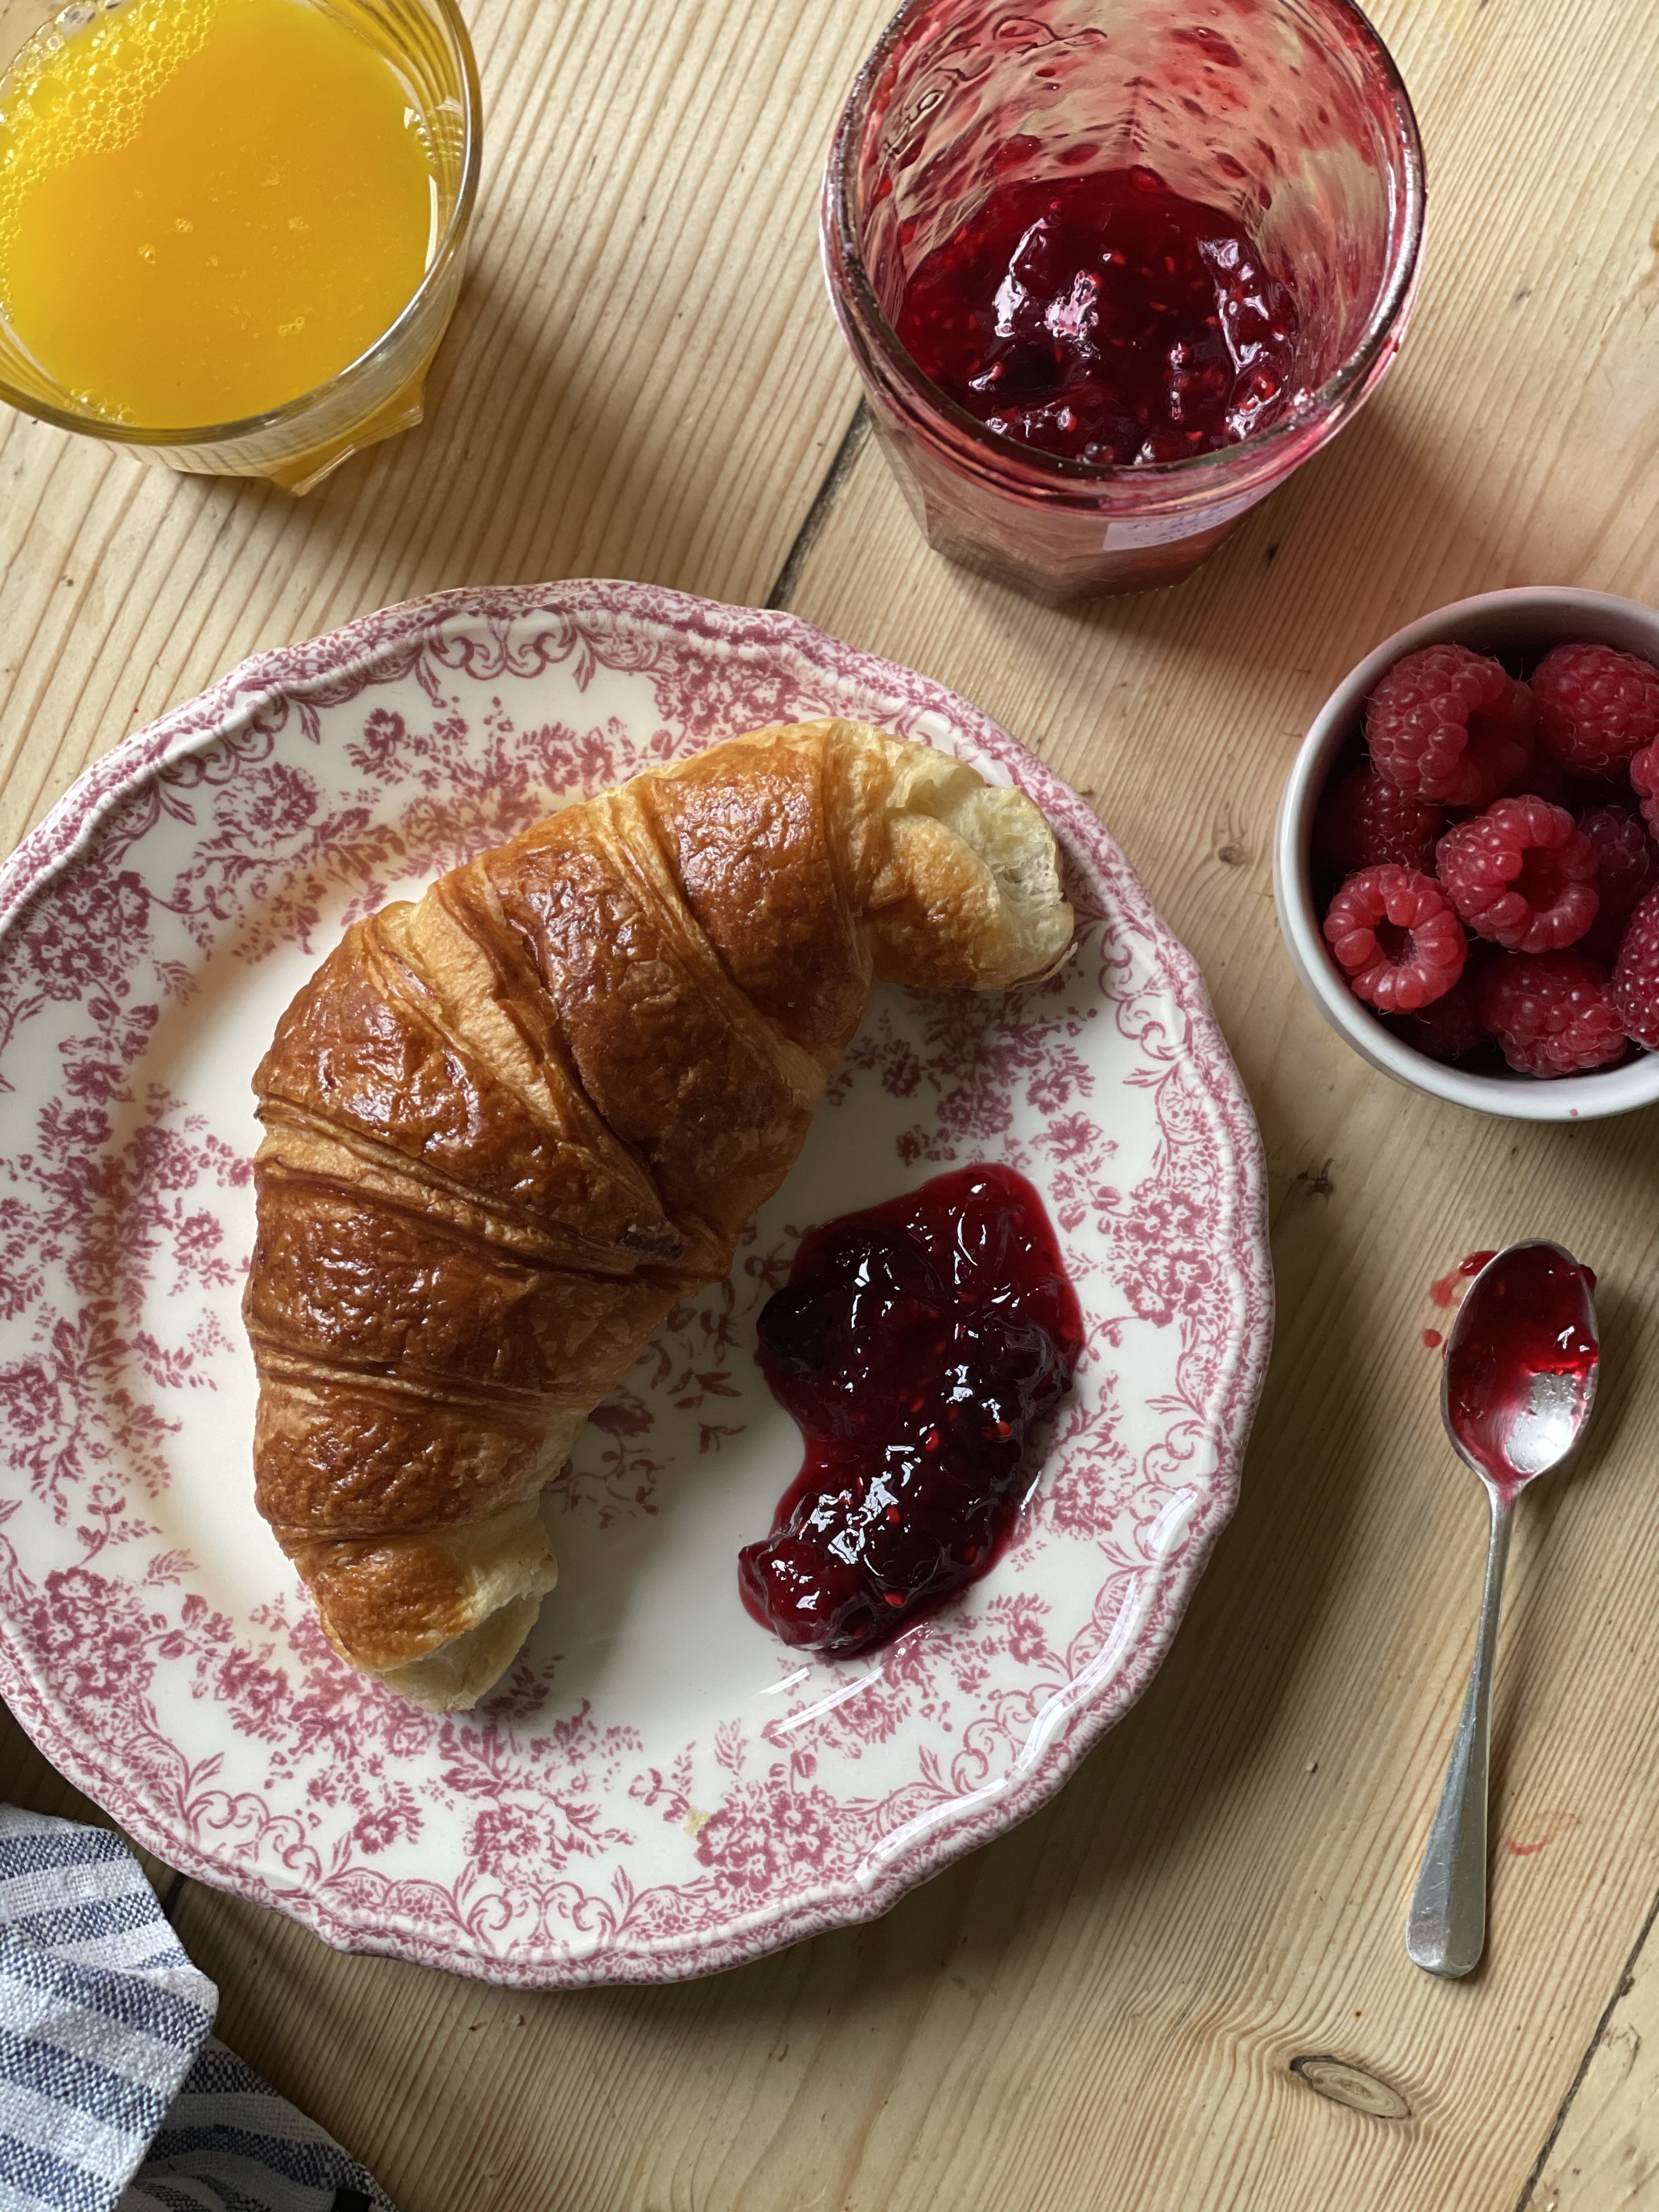 Summer berry jam on with a fresh flaky croissant served from breakfast with orange juice.